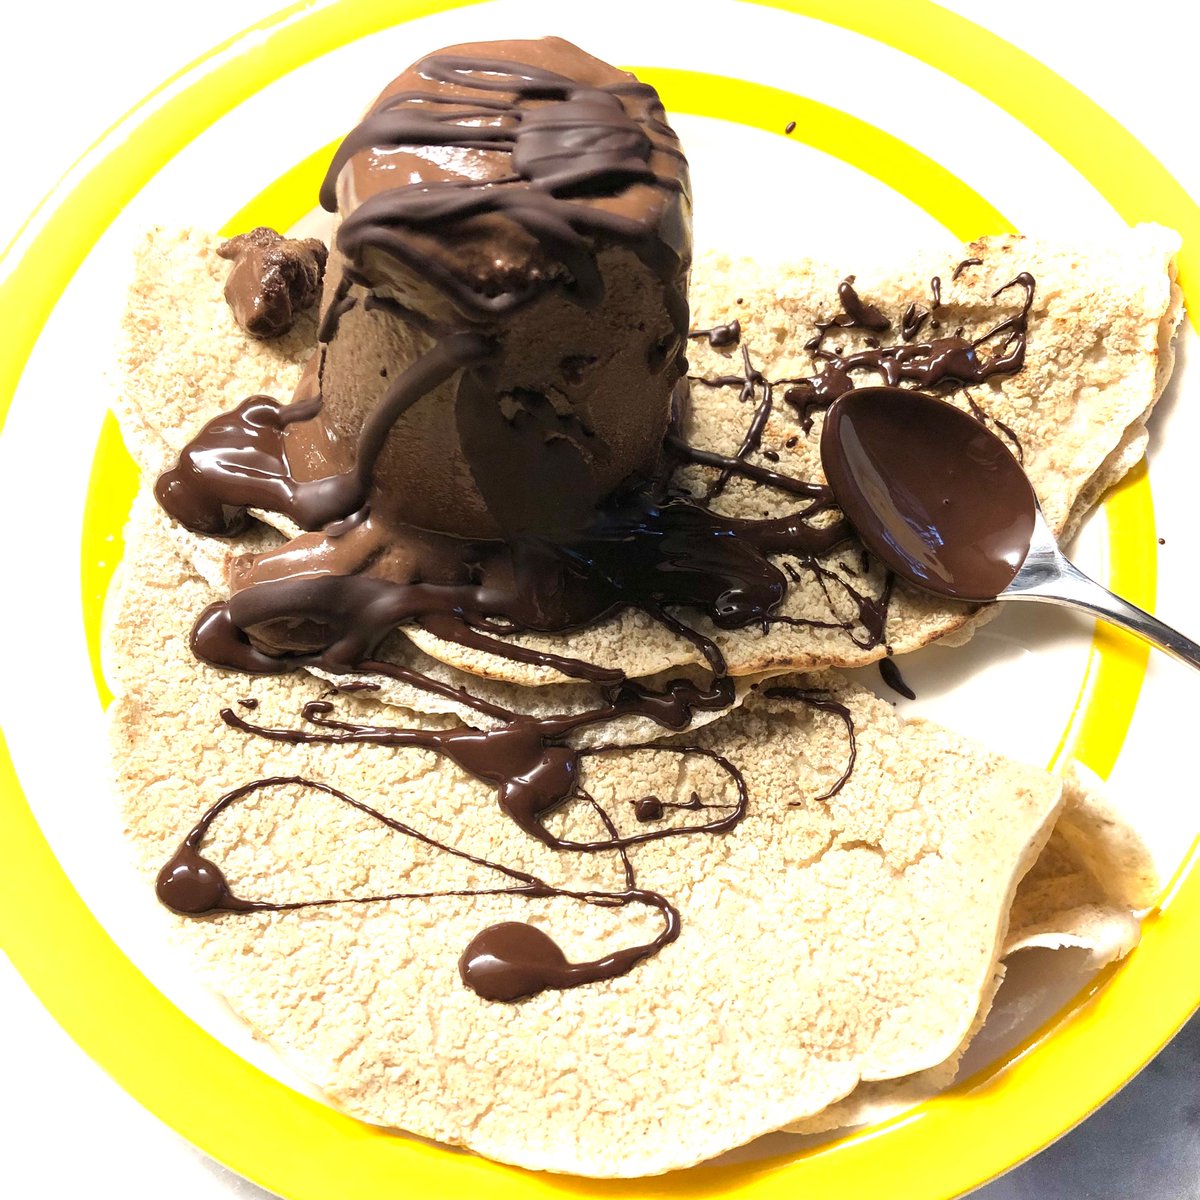 #veganhour @veganhour looking like #jacksonpollock again! Always stock the freezer with these #homemade nochurn #plantbased #chocolate #icecream a using @Alpro vanilla as the base. Serve with nofat #oat #pancakes (just oats and water)